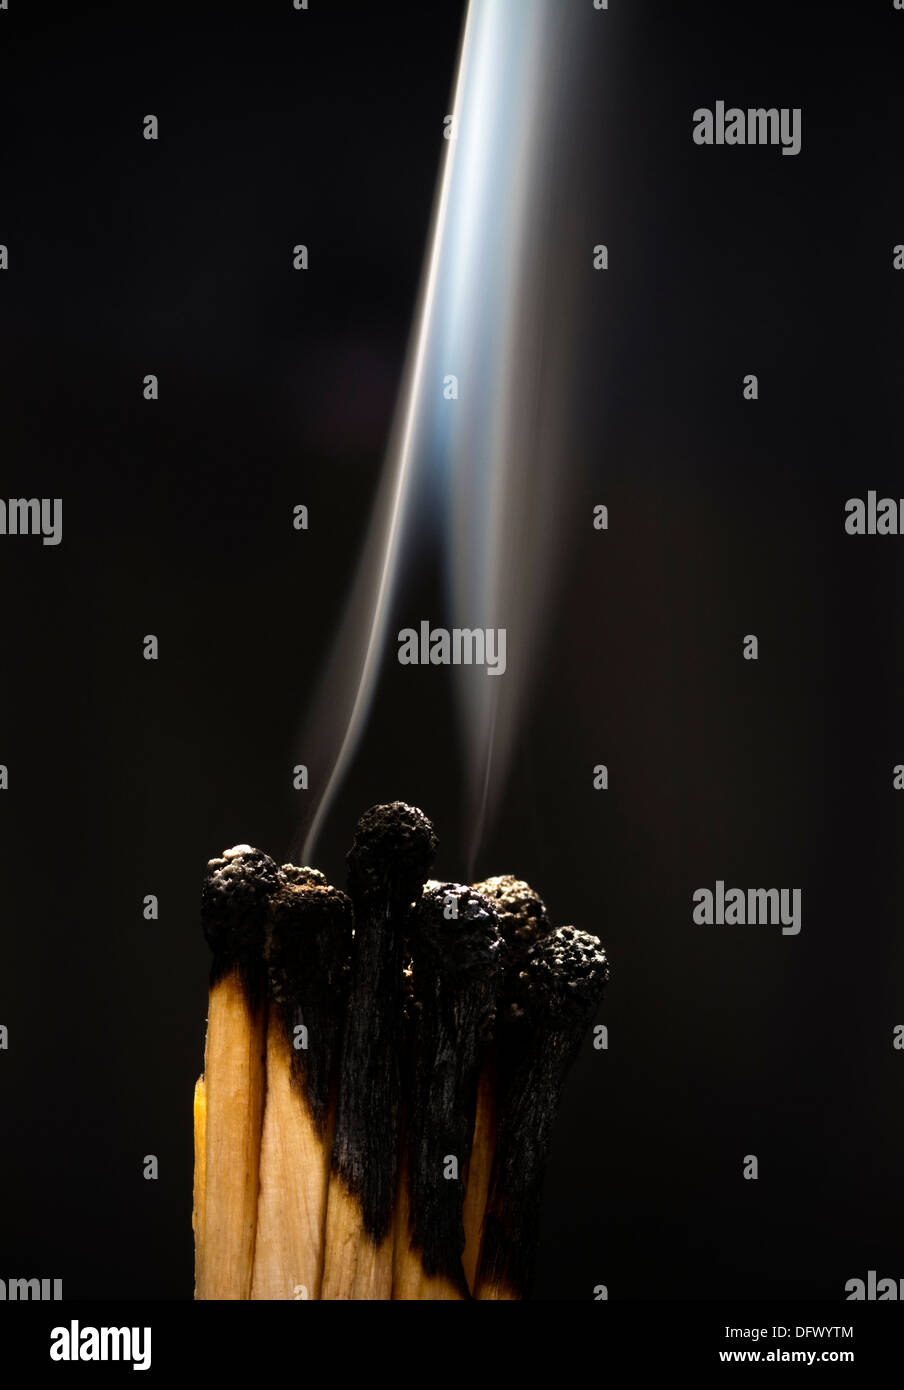 Concept photo showing burned out matches with smoke illustrating the burned out business metaphor Stock Photo